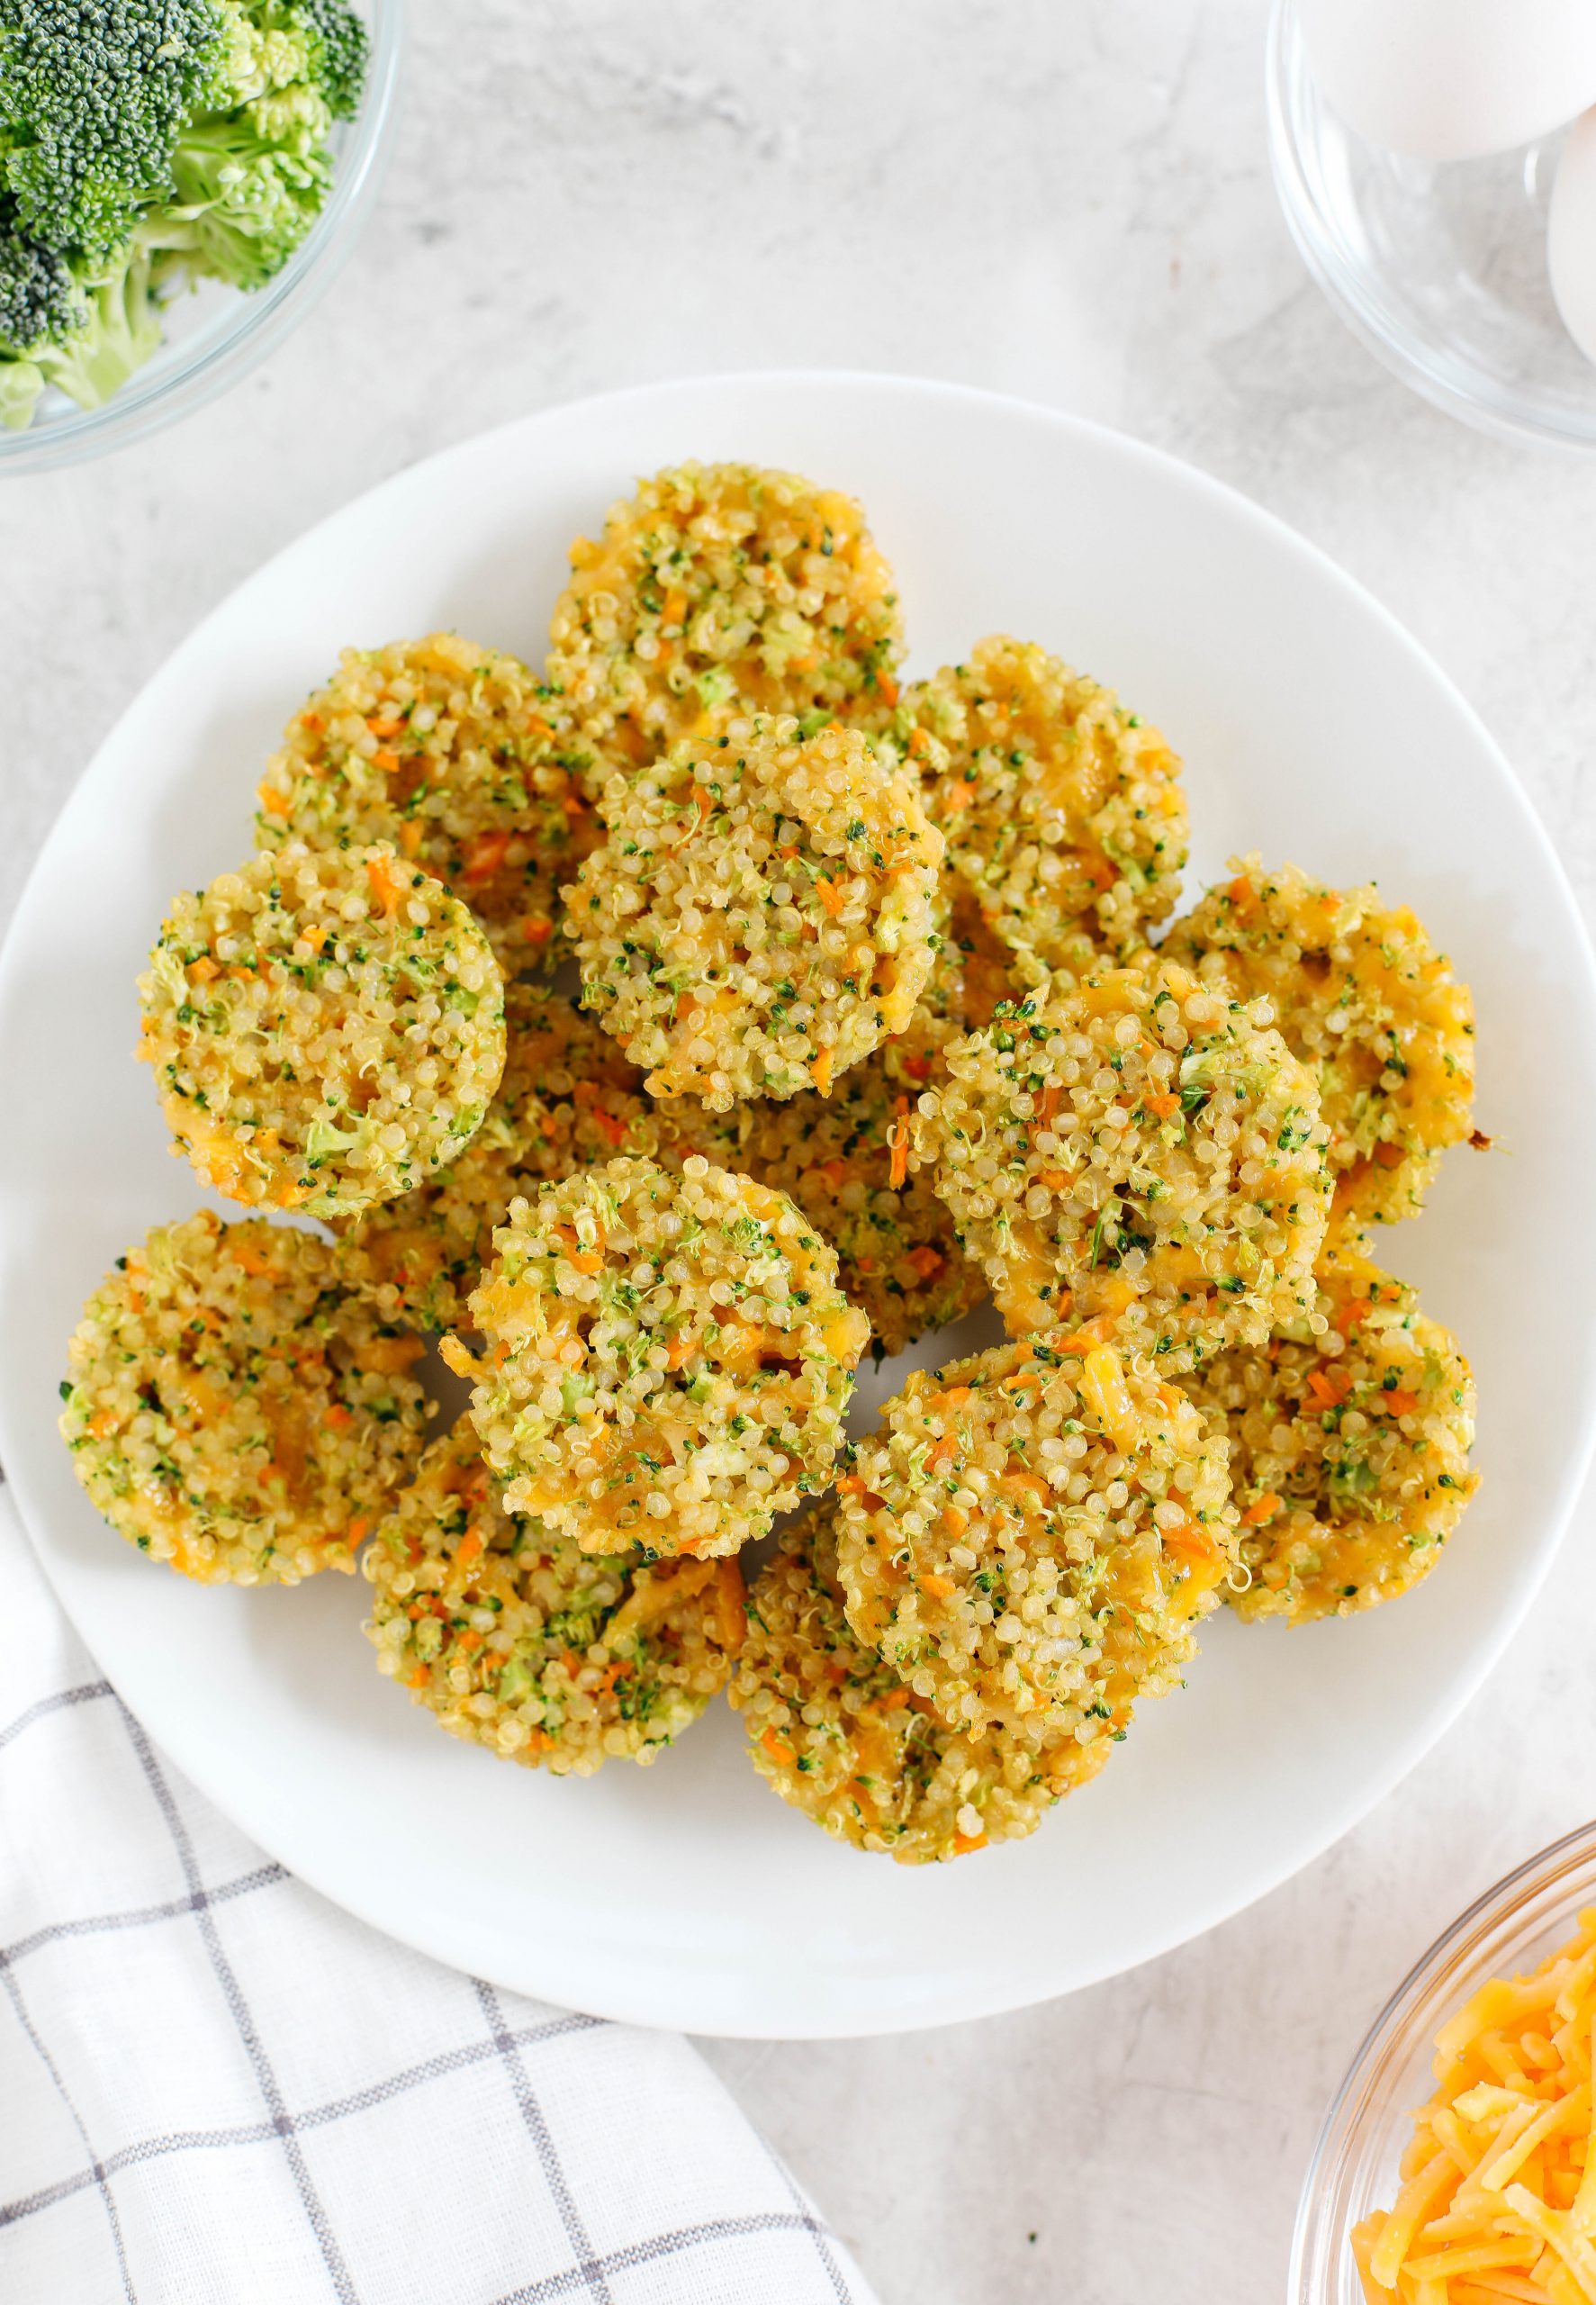 Bite-sized Cheesy Broccoli Quinoa Bites perfect for babies, toddlers and kids that are healthy, packed with protein and easily made with only 5 simple ingredients!